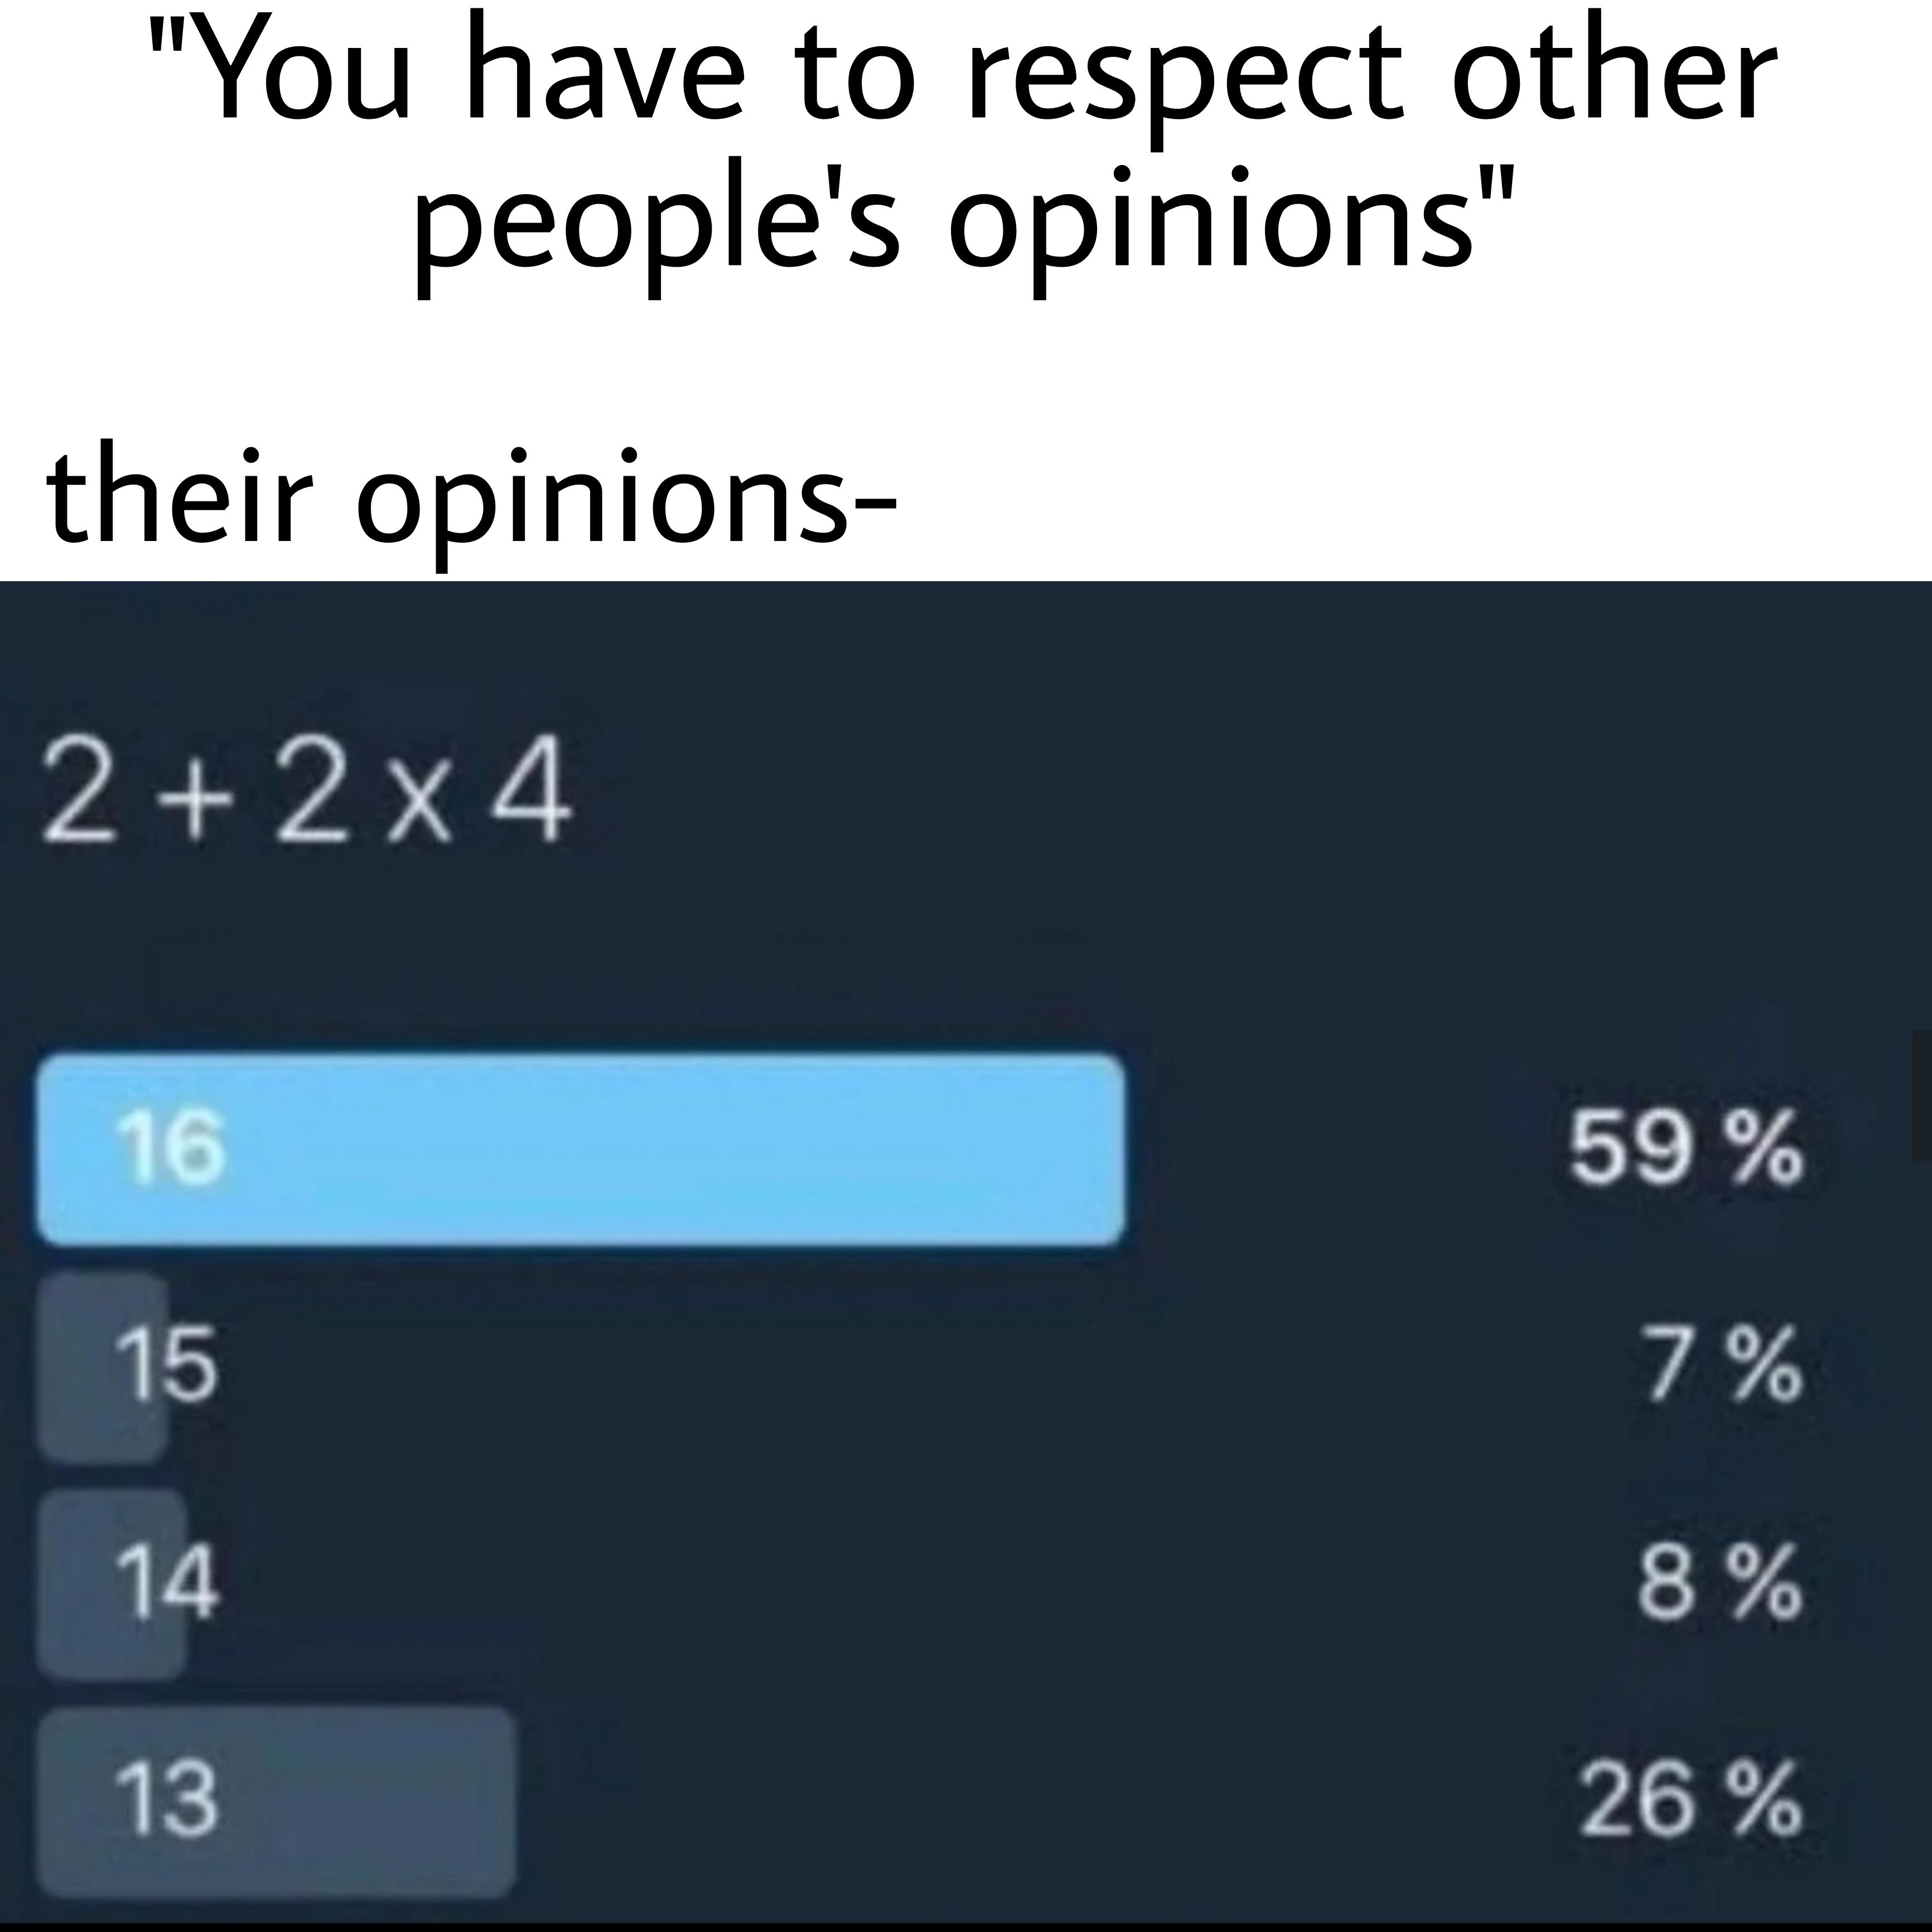 dank memes - road - r "You have to respect other people's opinions" their opinions 2 2x4 16 59 % 15 7 % 14 8% 13 26 %